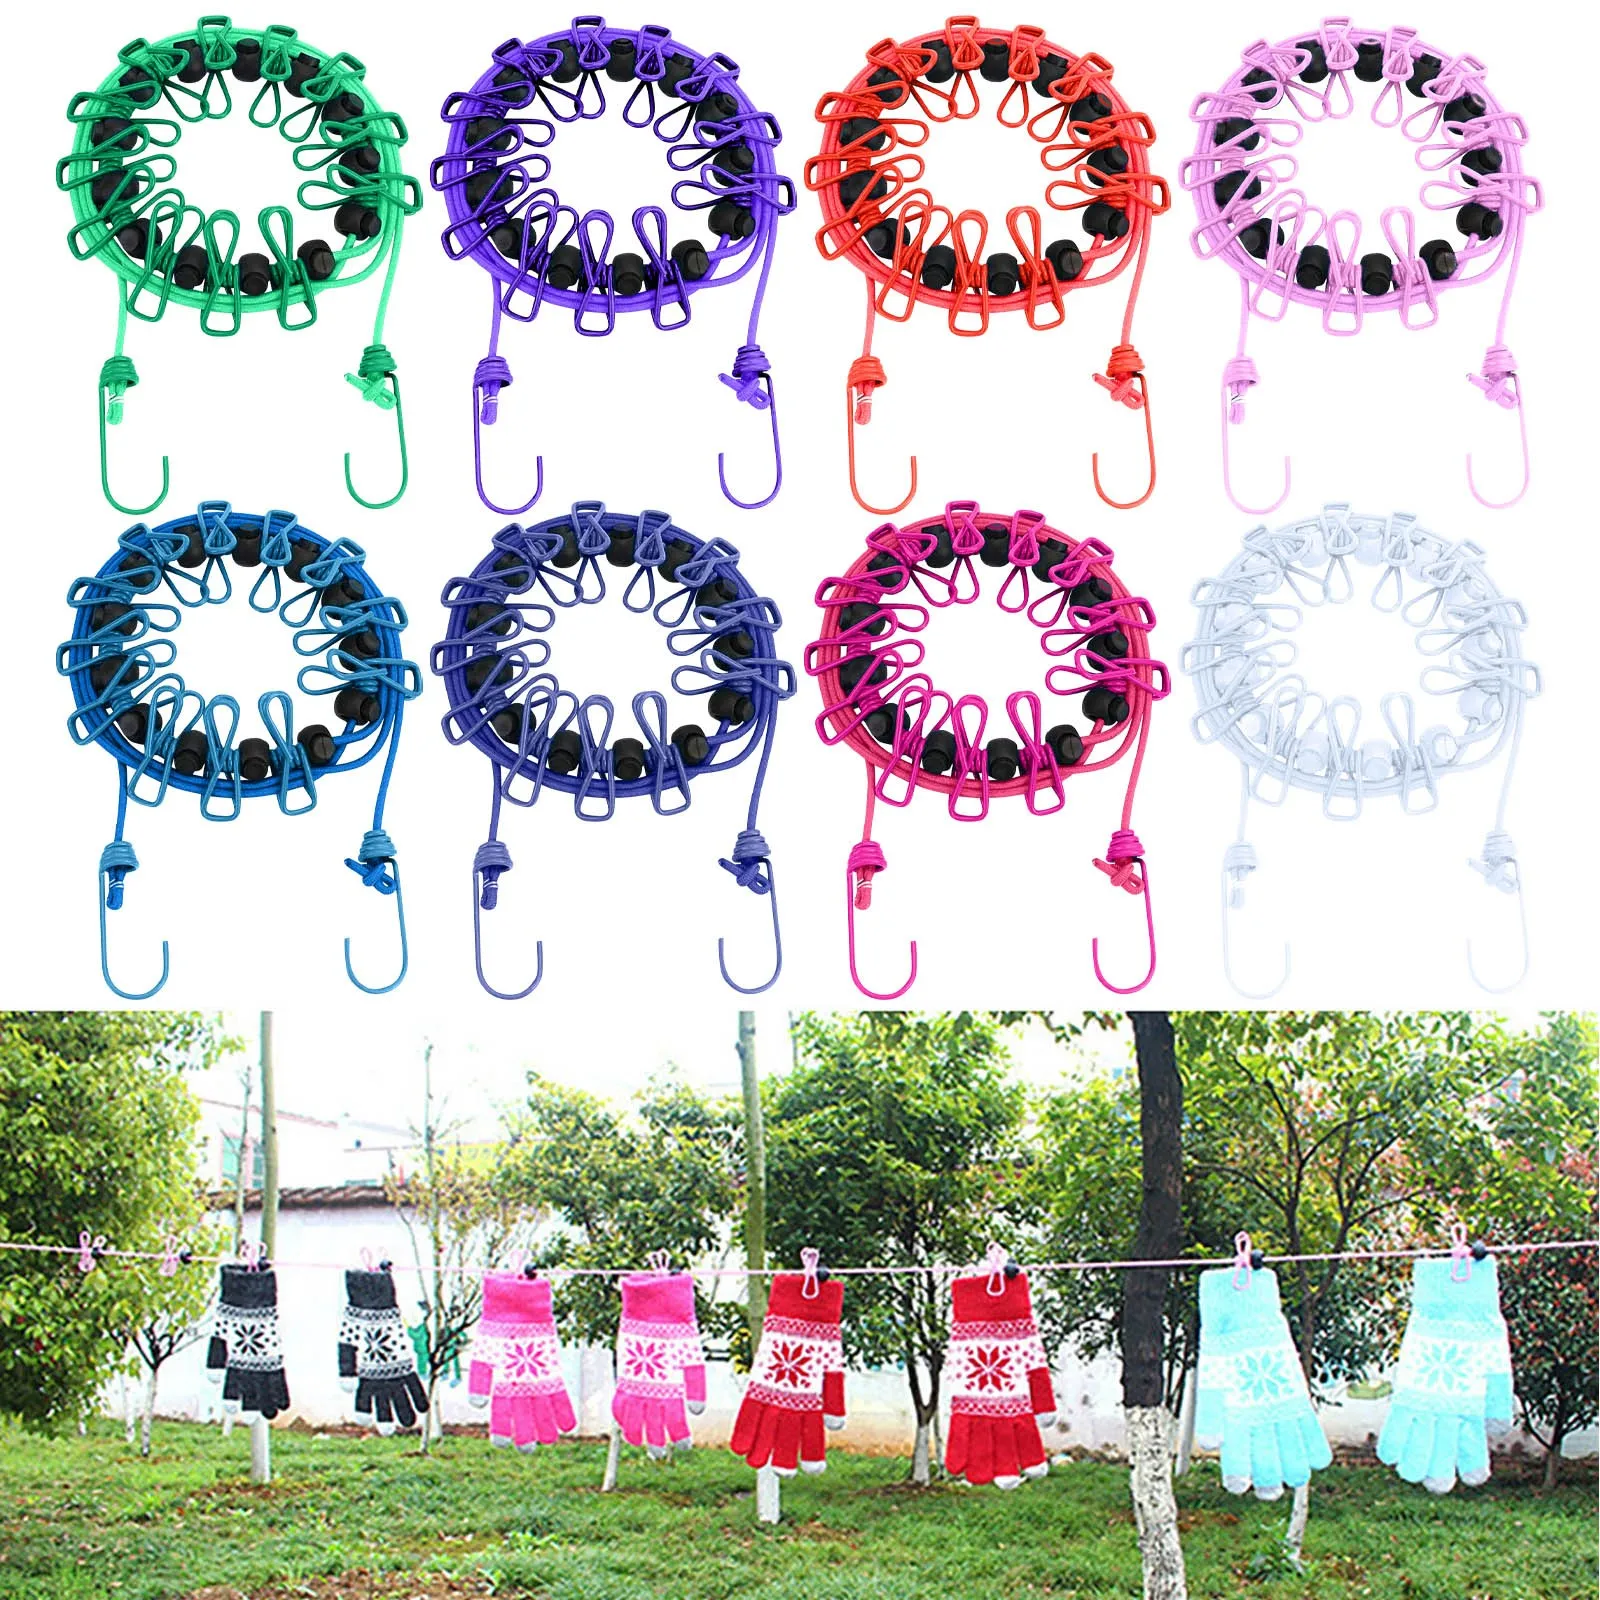 Portable Travel Camping Clothesline Washing Clothes Line Rope with 12 Peg Clips 